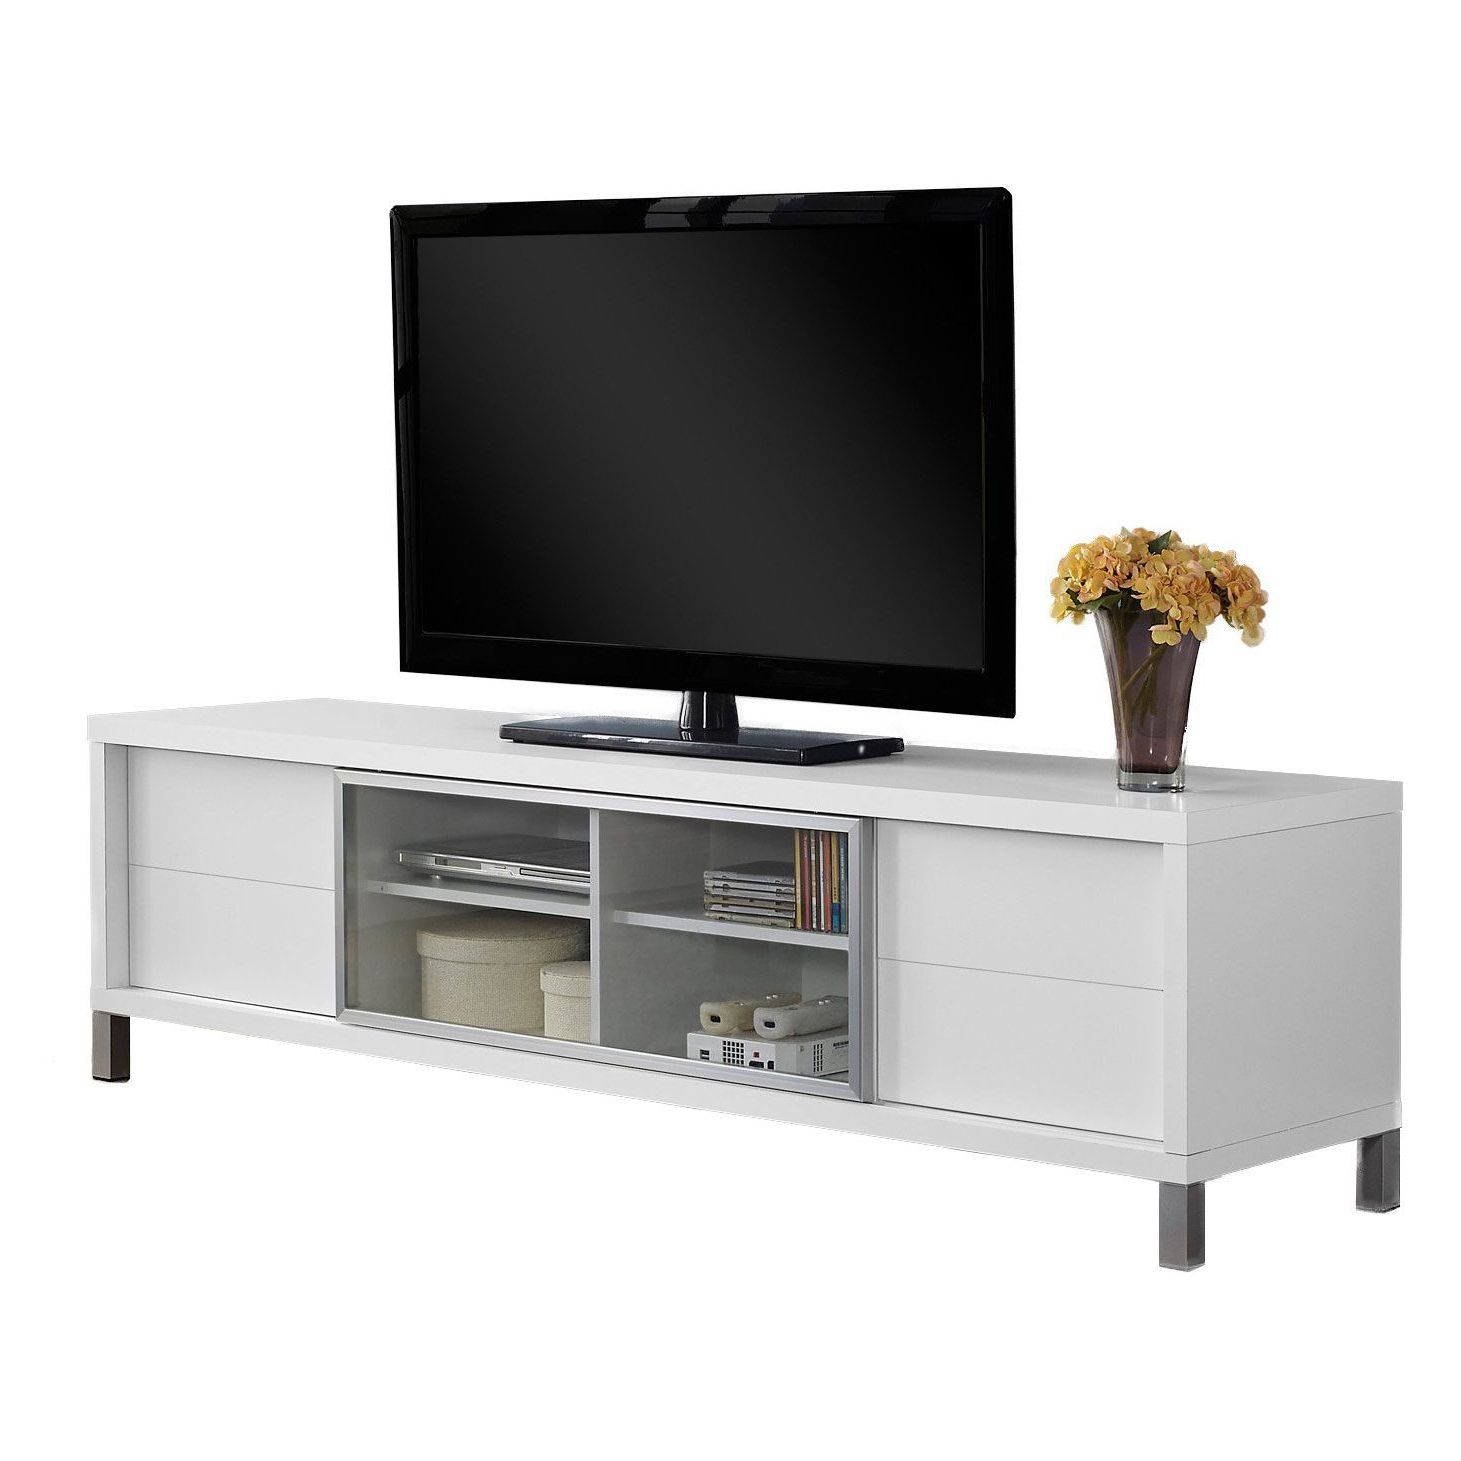 Kinsella Tv Stands For Tvs Up To 70" Intended For Favorite Monarch Tv Stand White Euro Style For Tvs Up To 70"l (Photo 2 of 25)